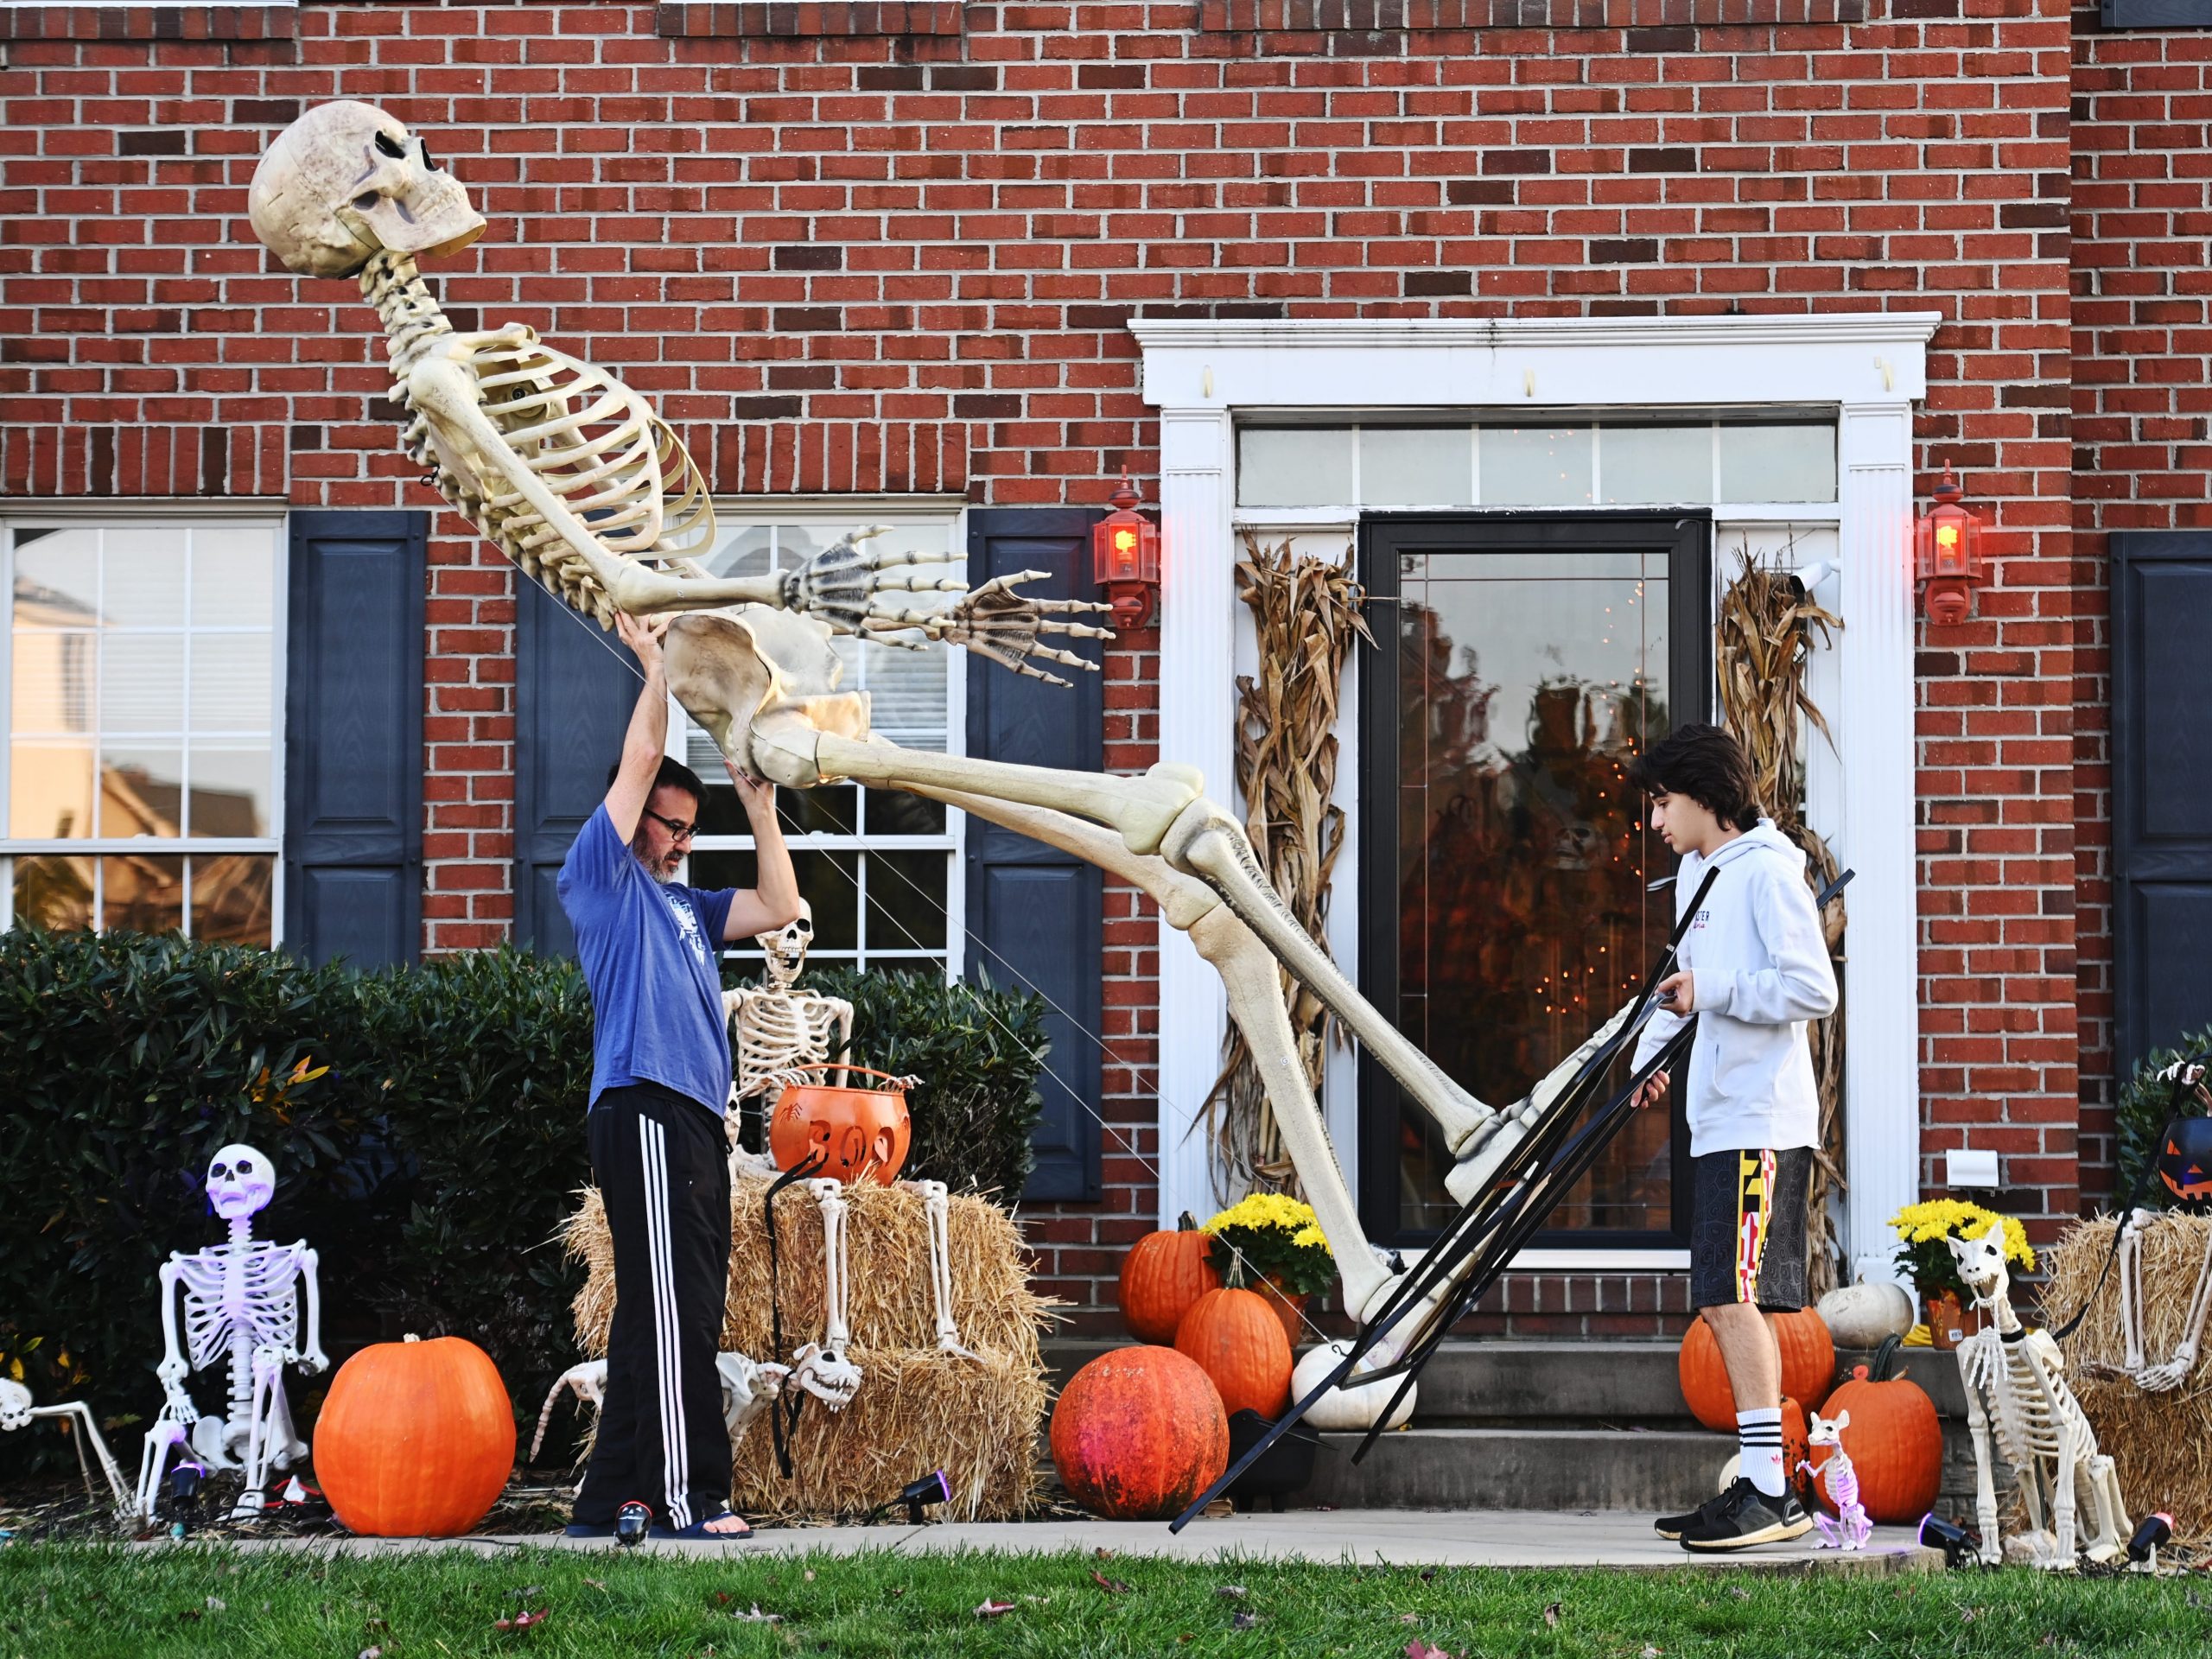 A father and son take their 12-foot-tall Home Depot skeleton into storage after Halloween.